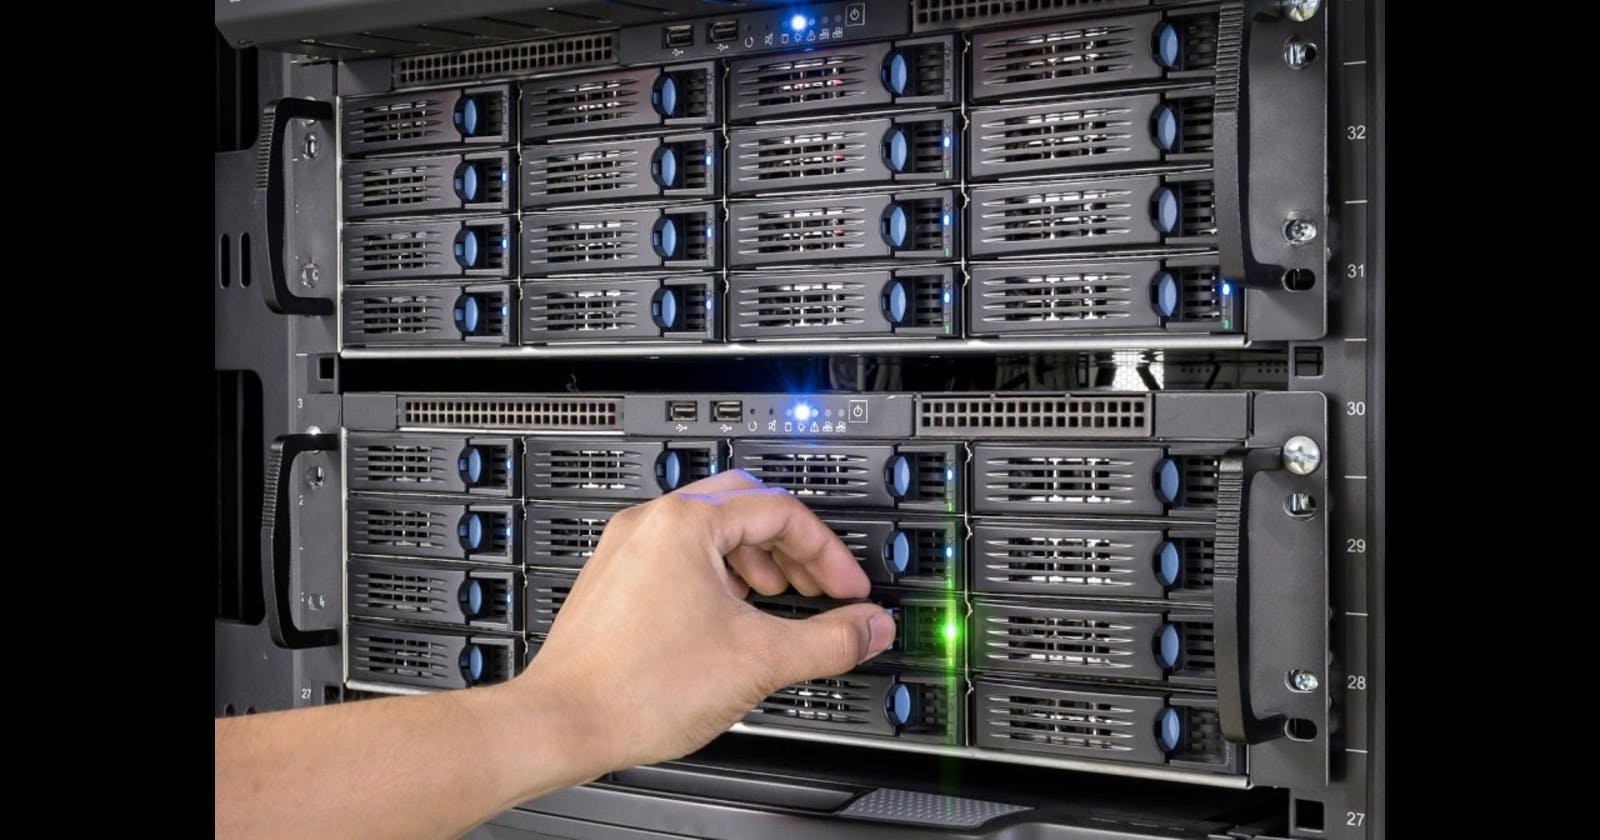 The Network Attached Storage (NAS) platform expands seamlessly across all available resources.